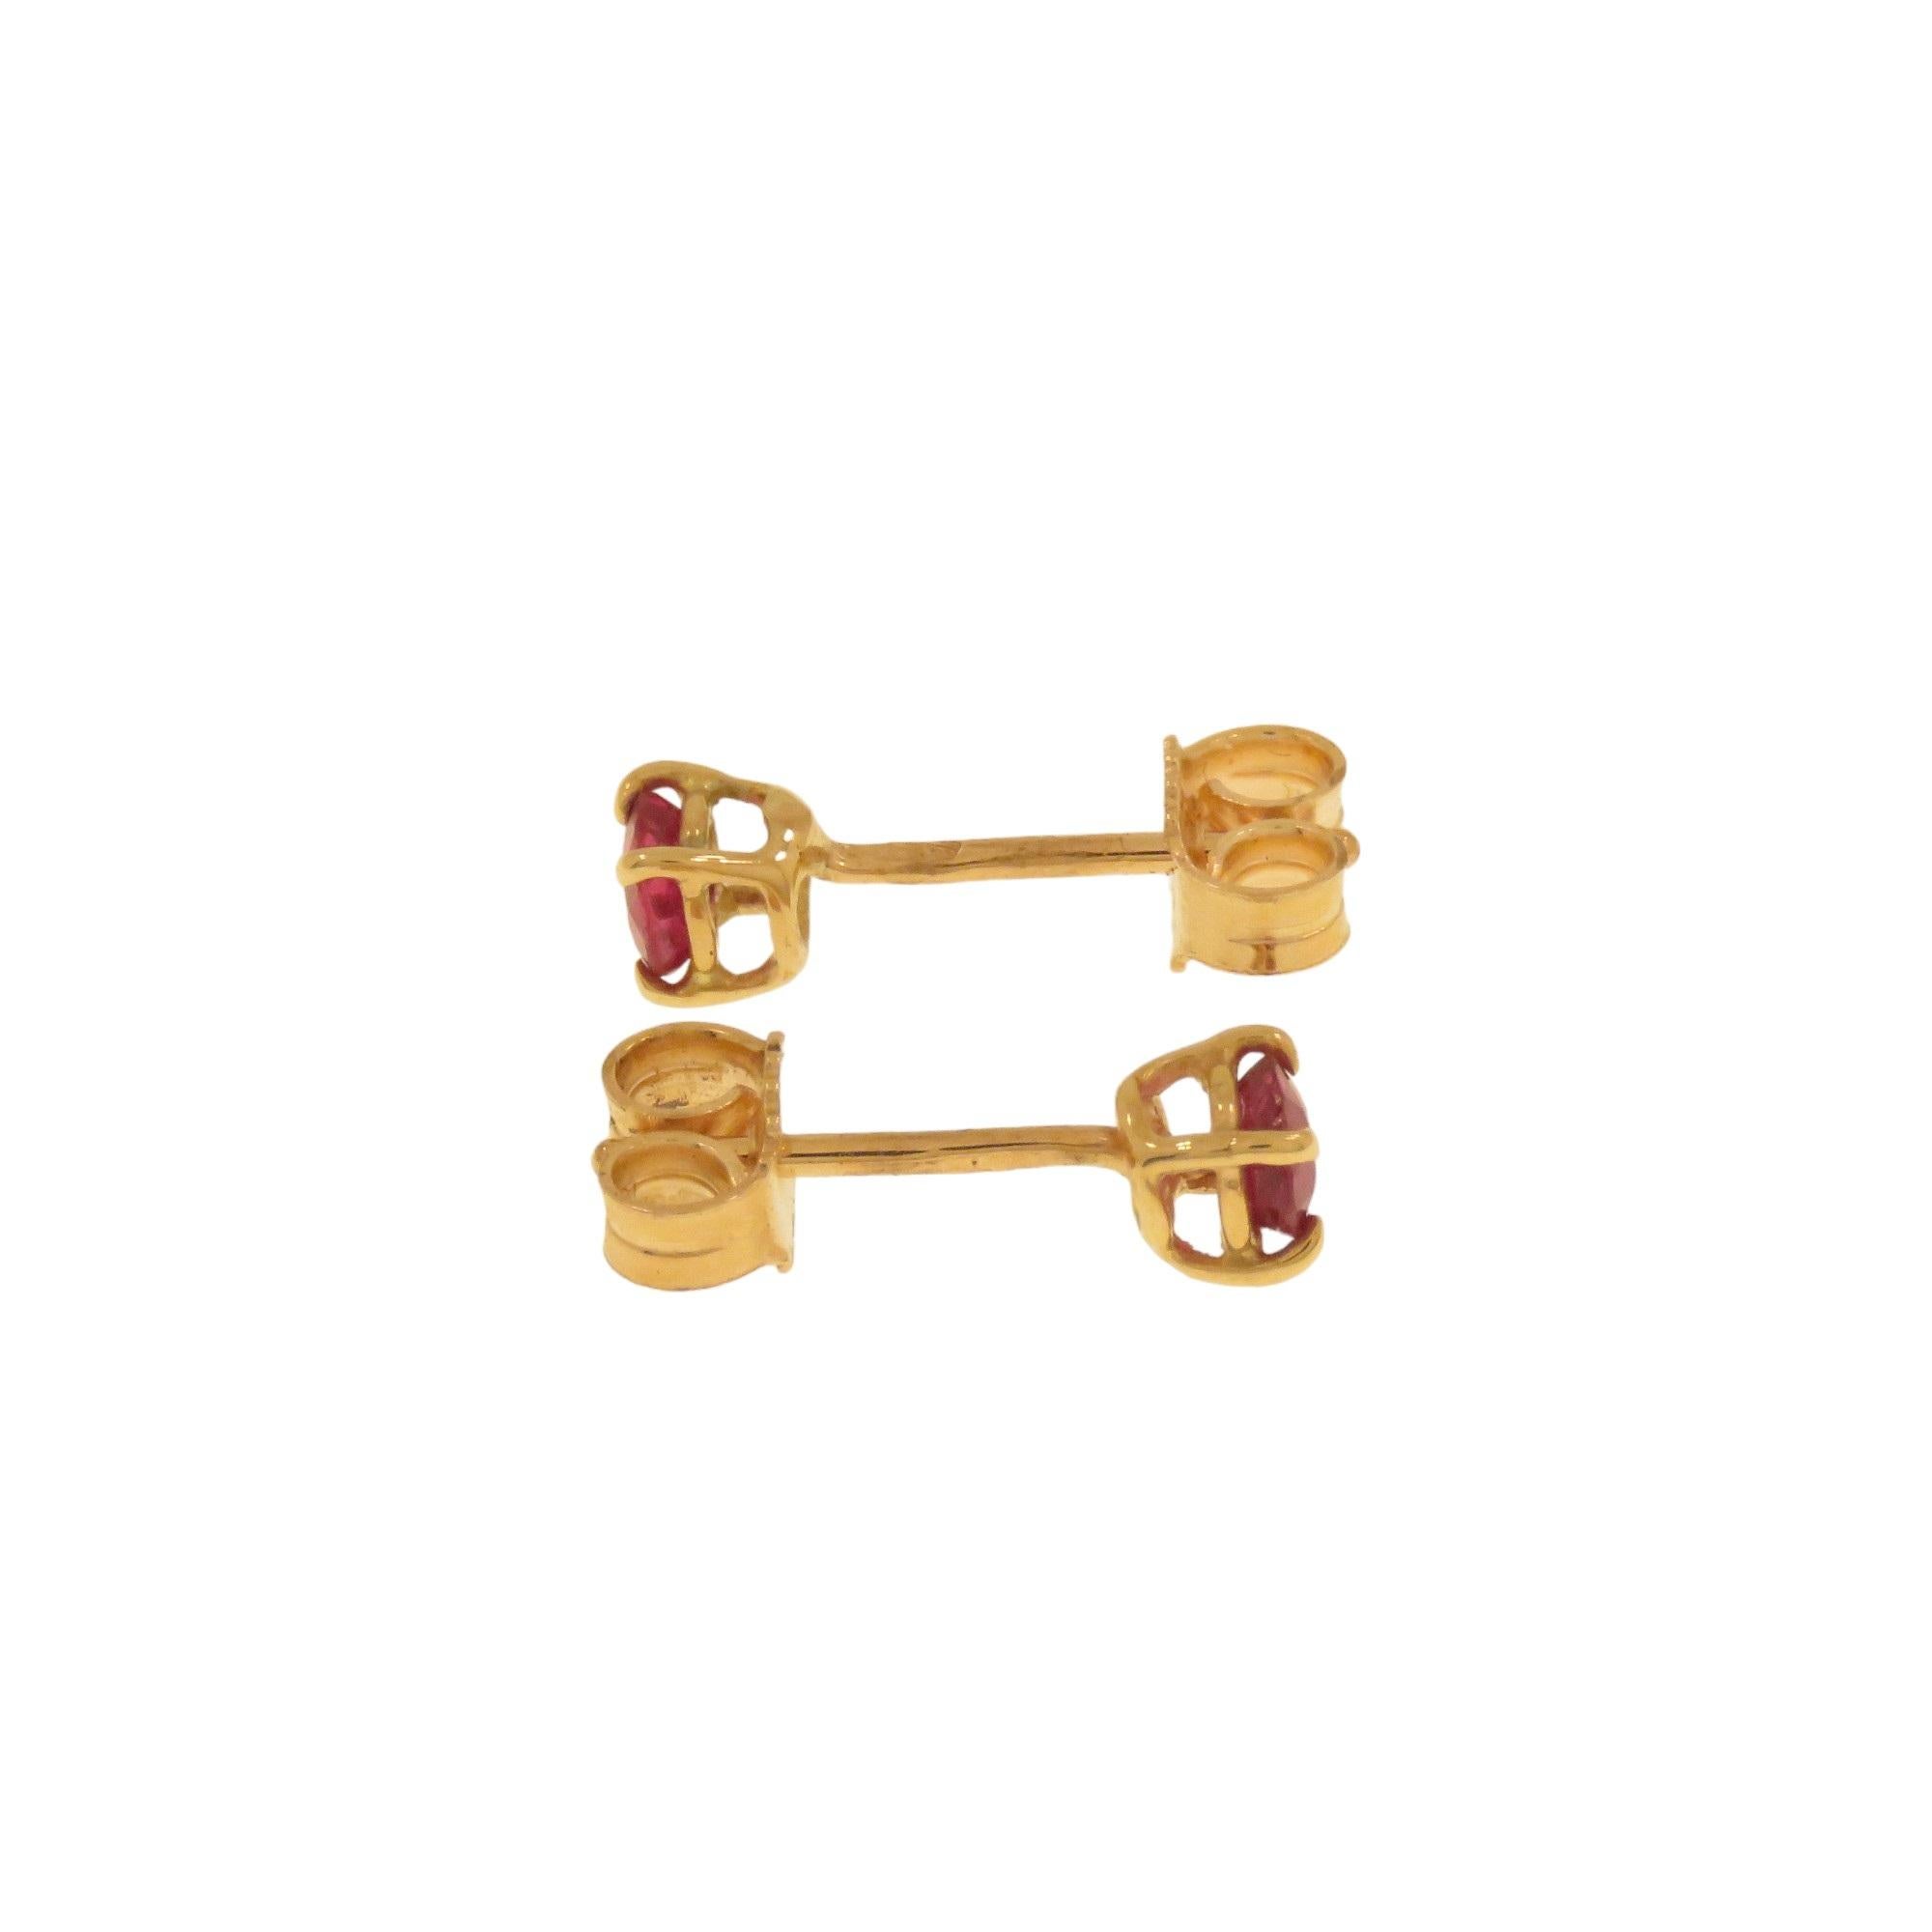 Brilliant Cut Rose Gold Earrings with Rubies made in Italy For Sale